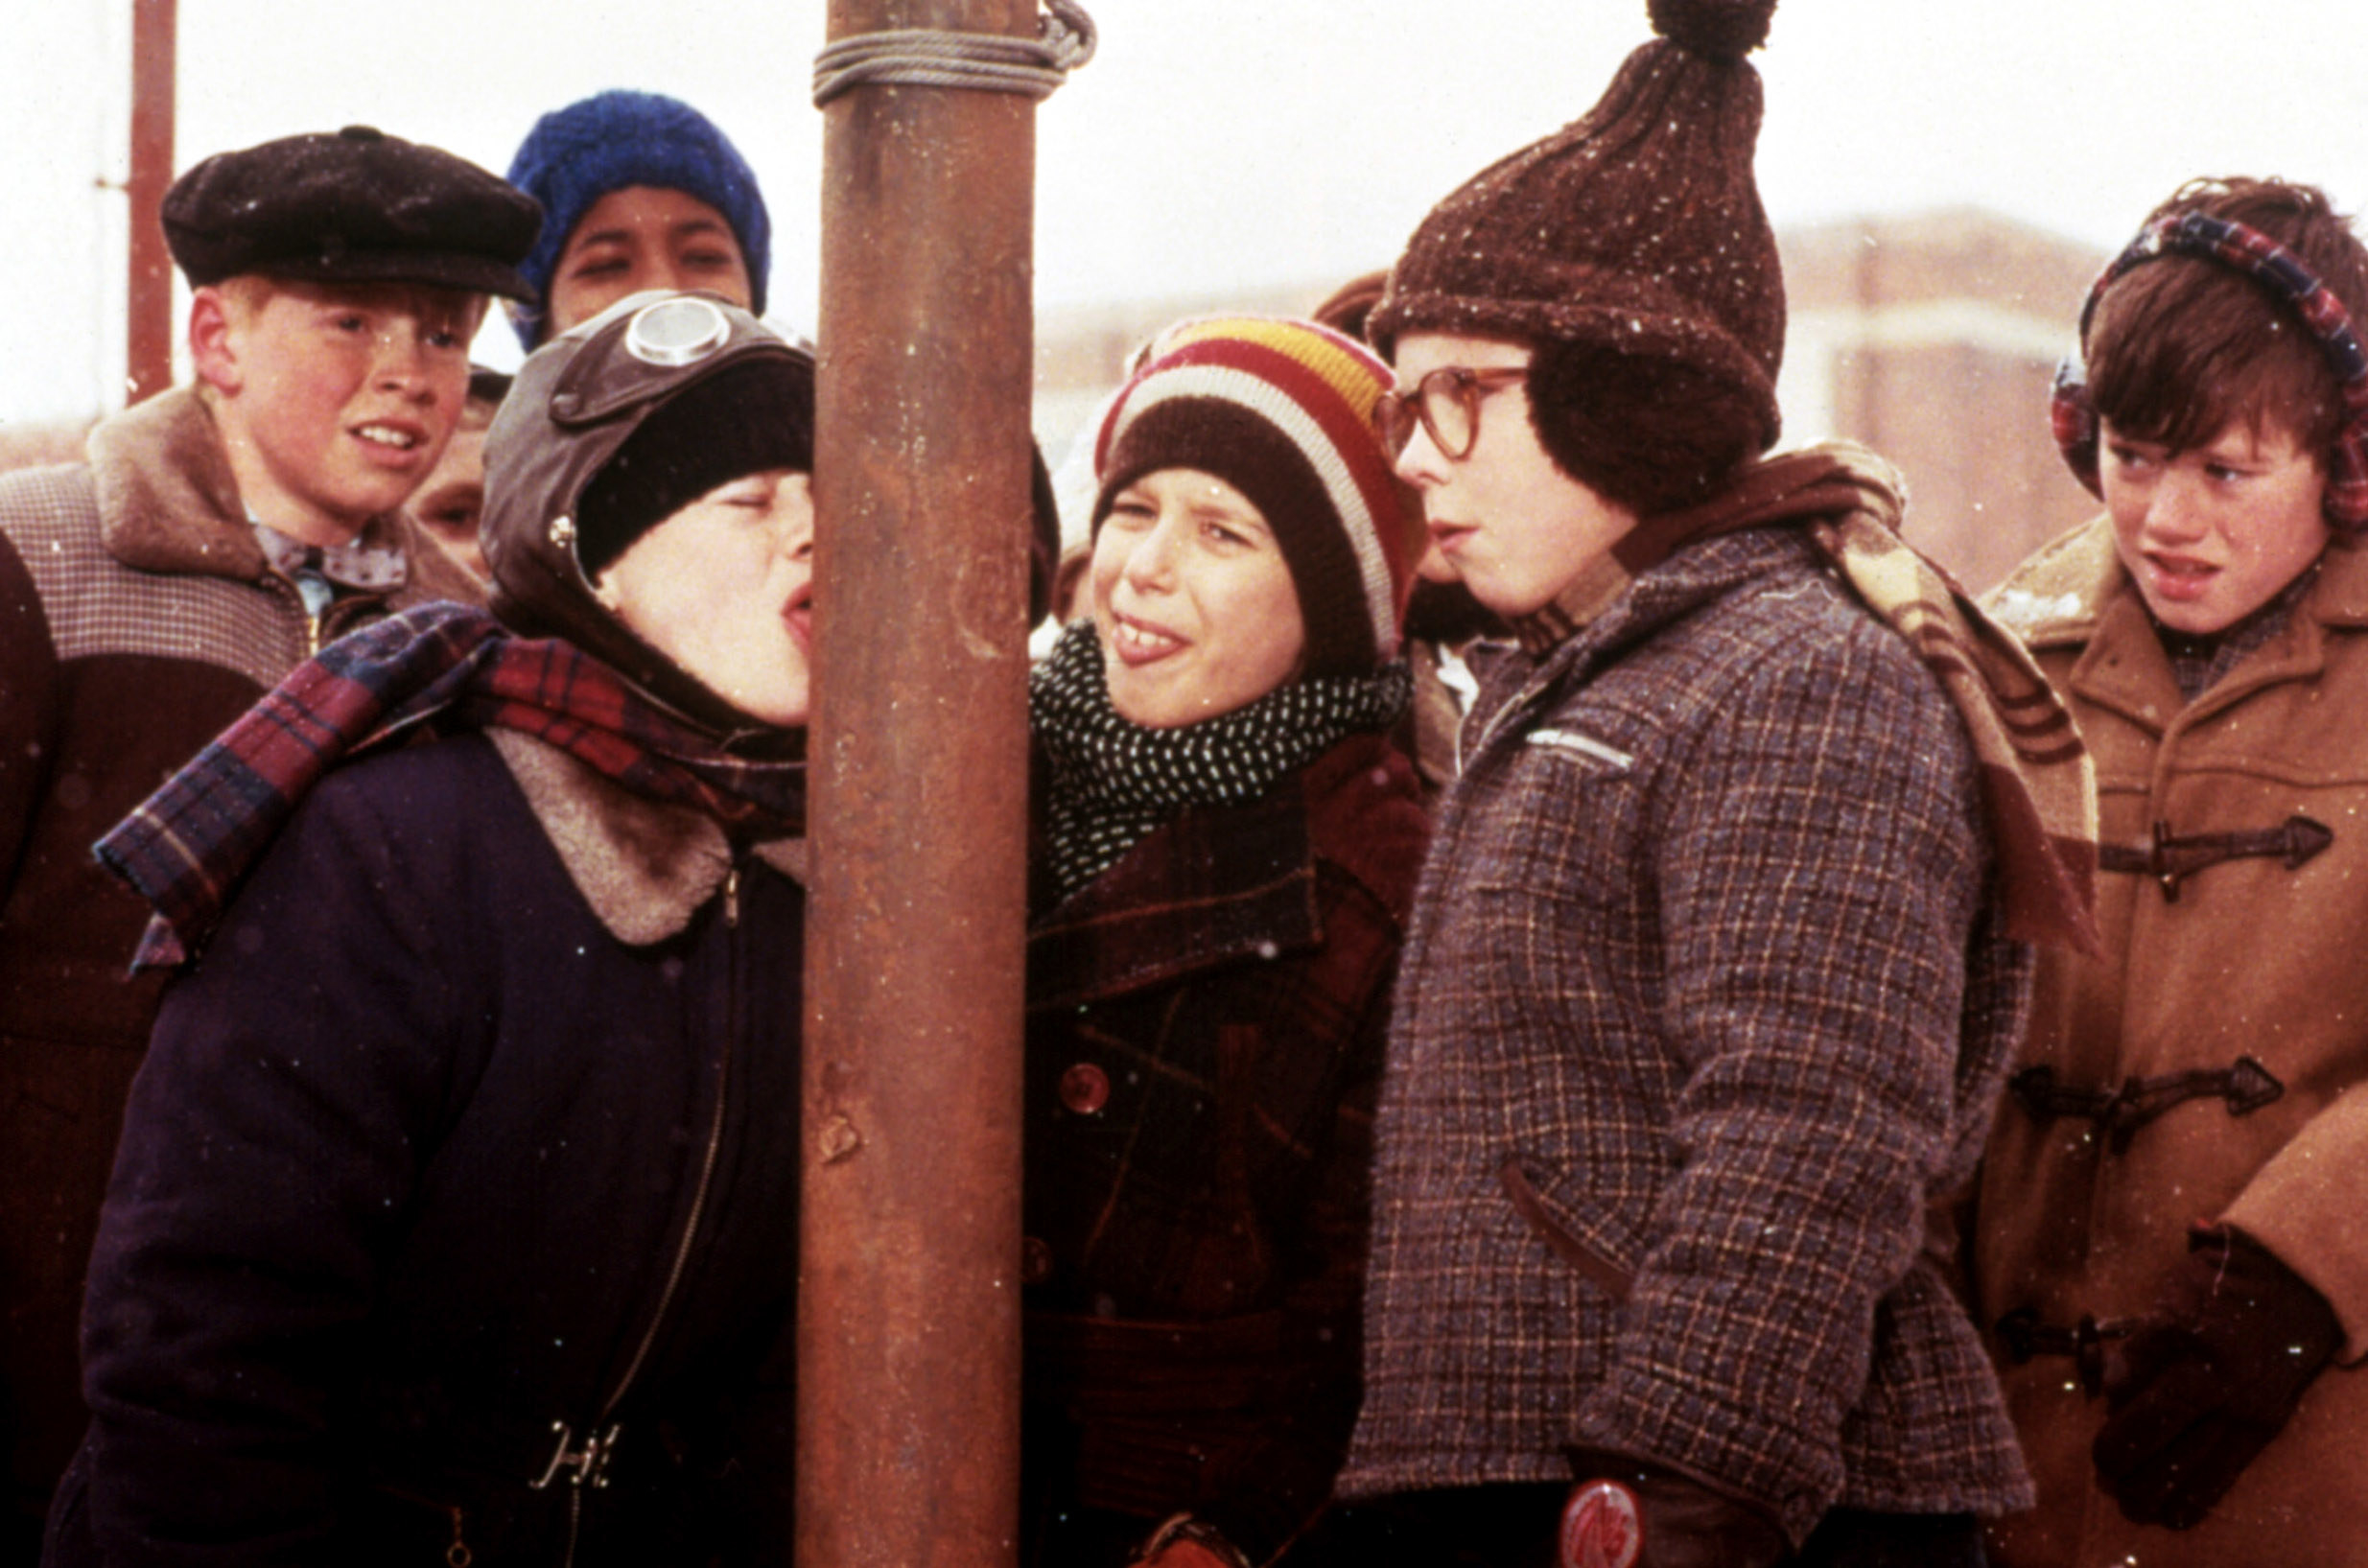 Scott Schwartz, R.D. Robb and Peter Billingsley in A Christmas Story